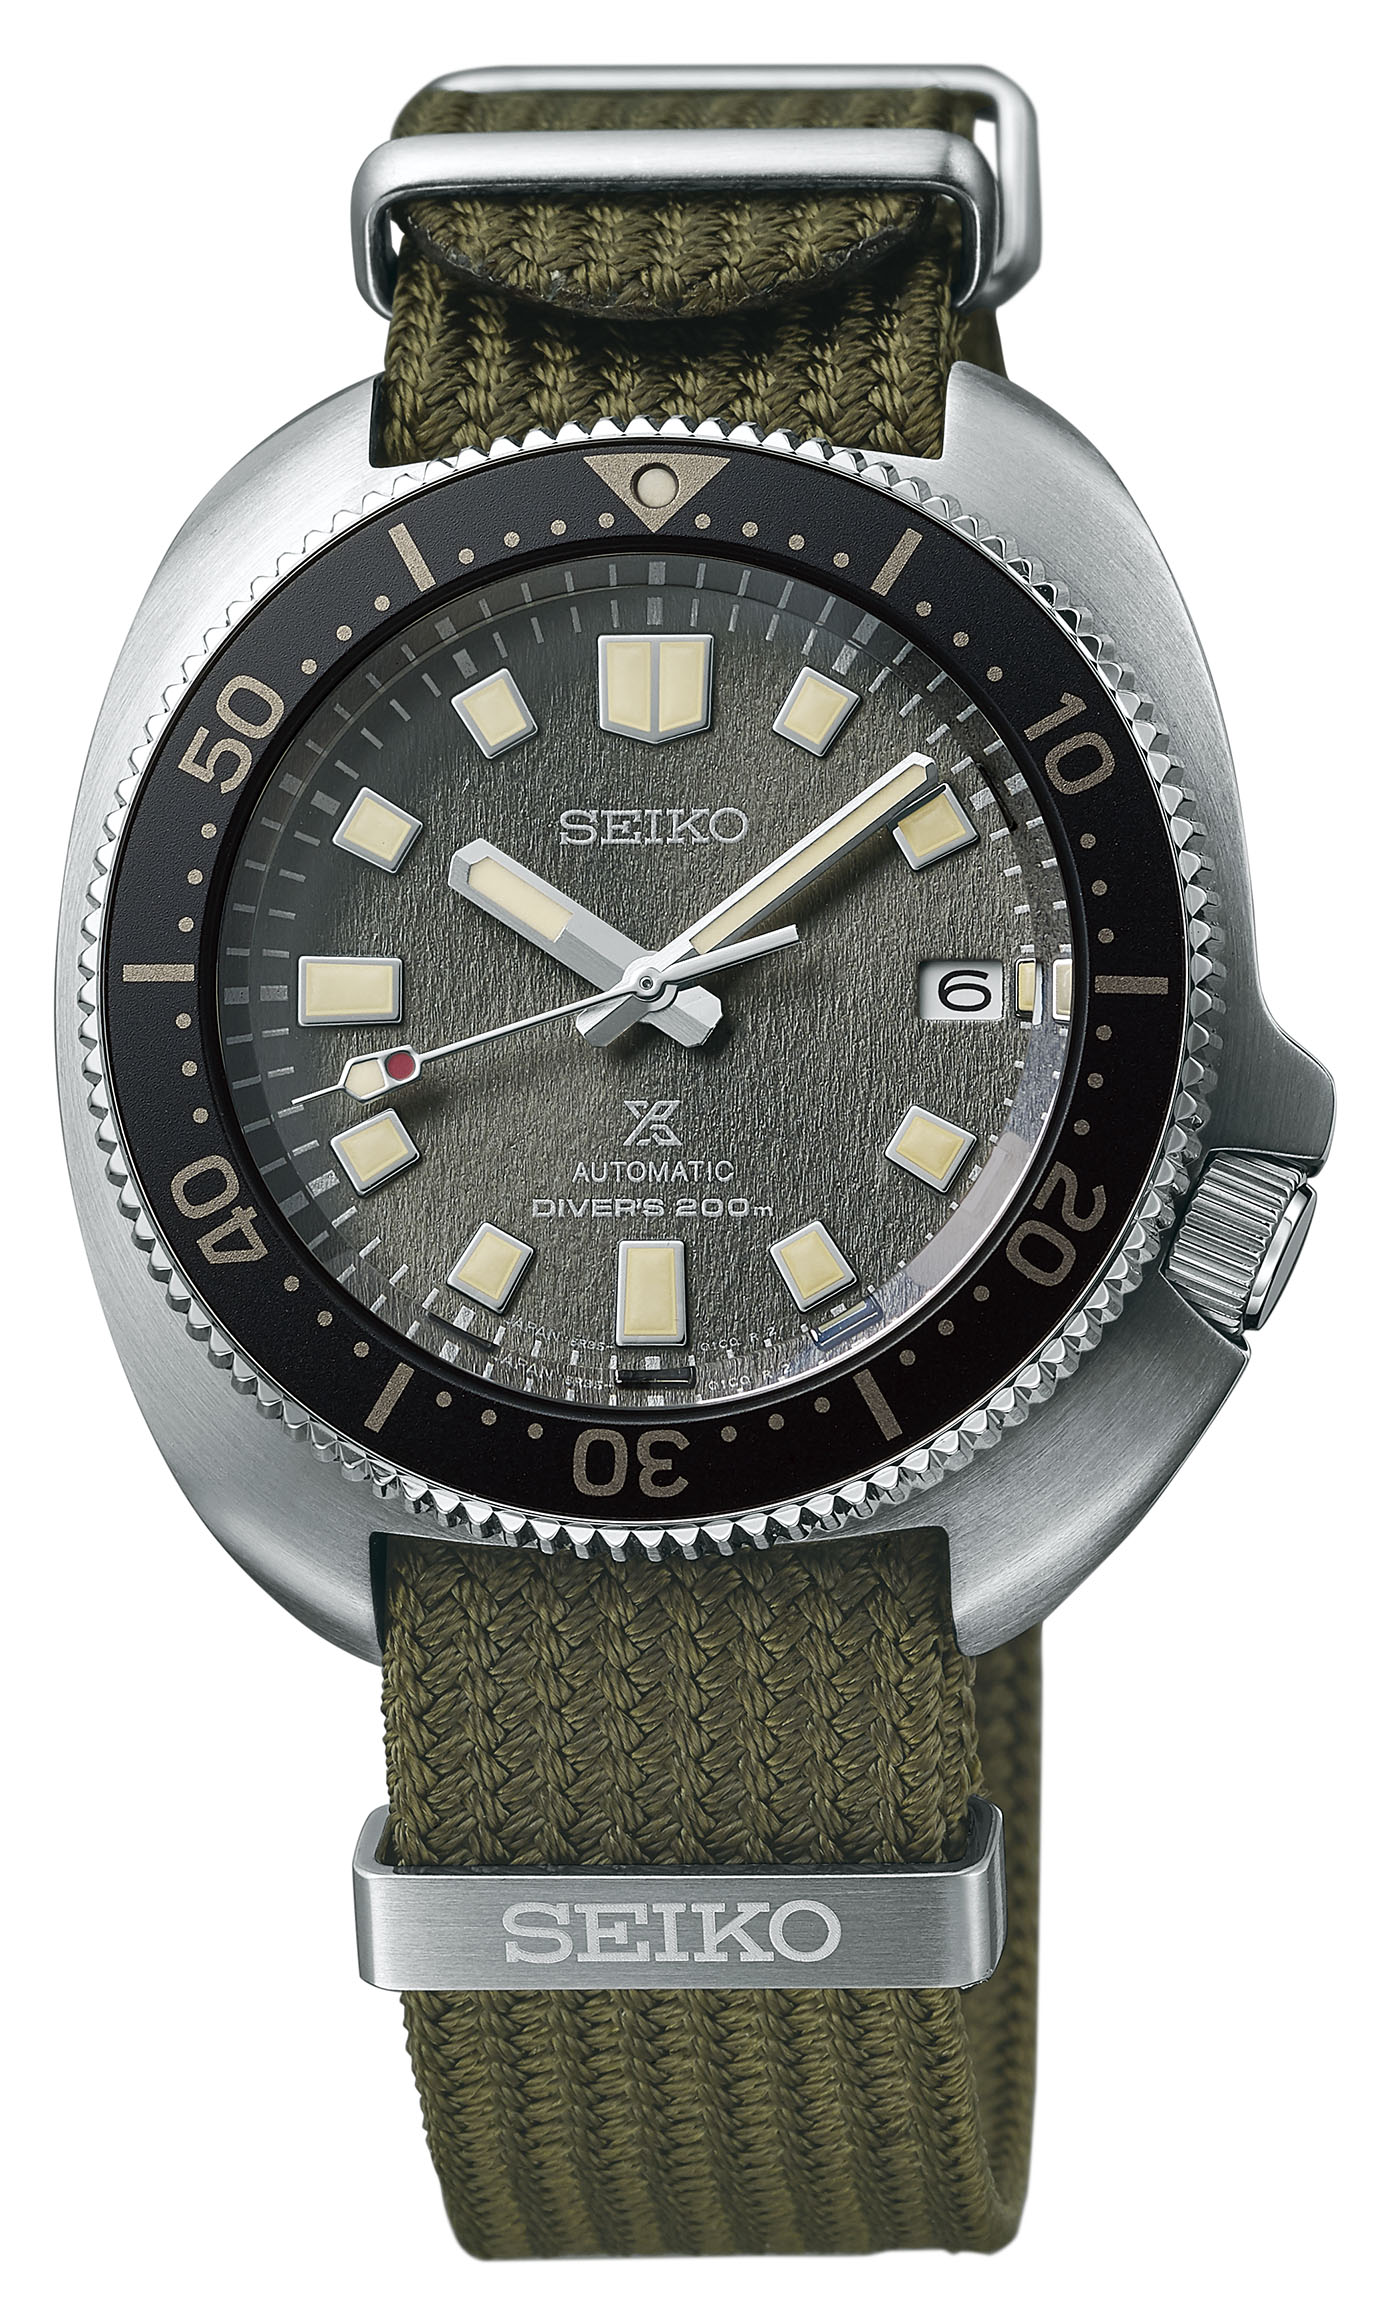 Introducing The Seiko Prospex SPB237 And SPB239 Dive Watches